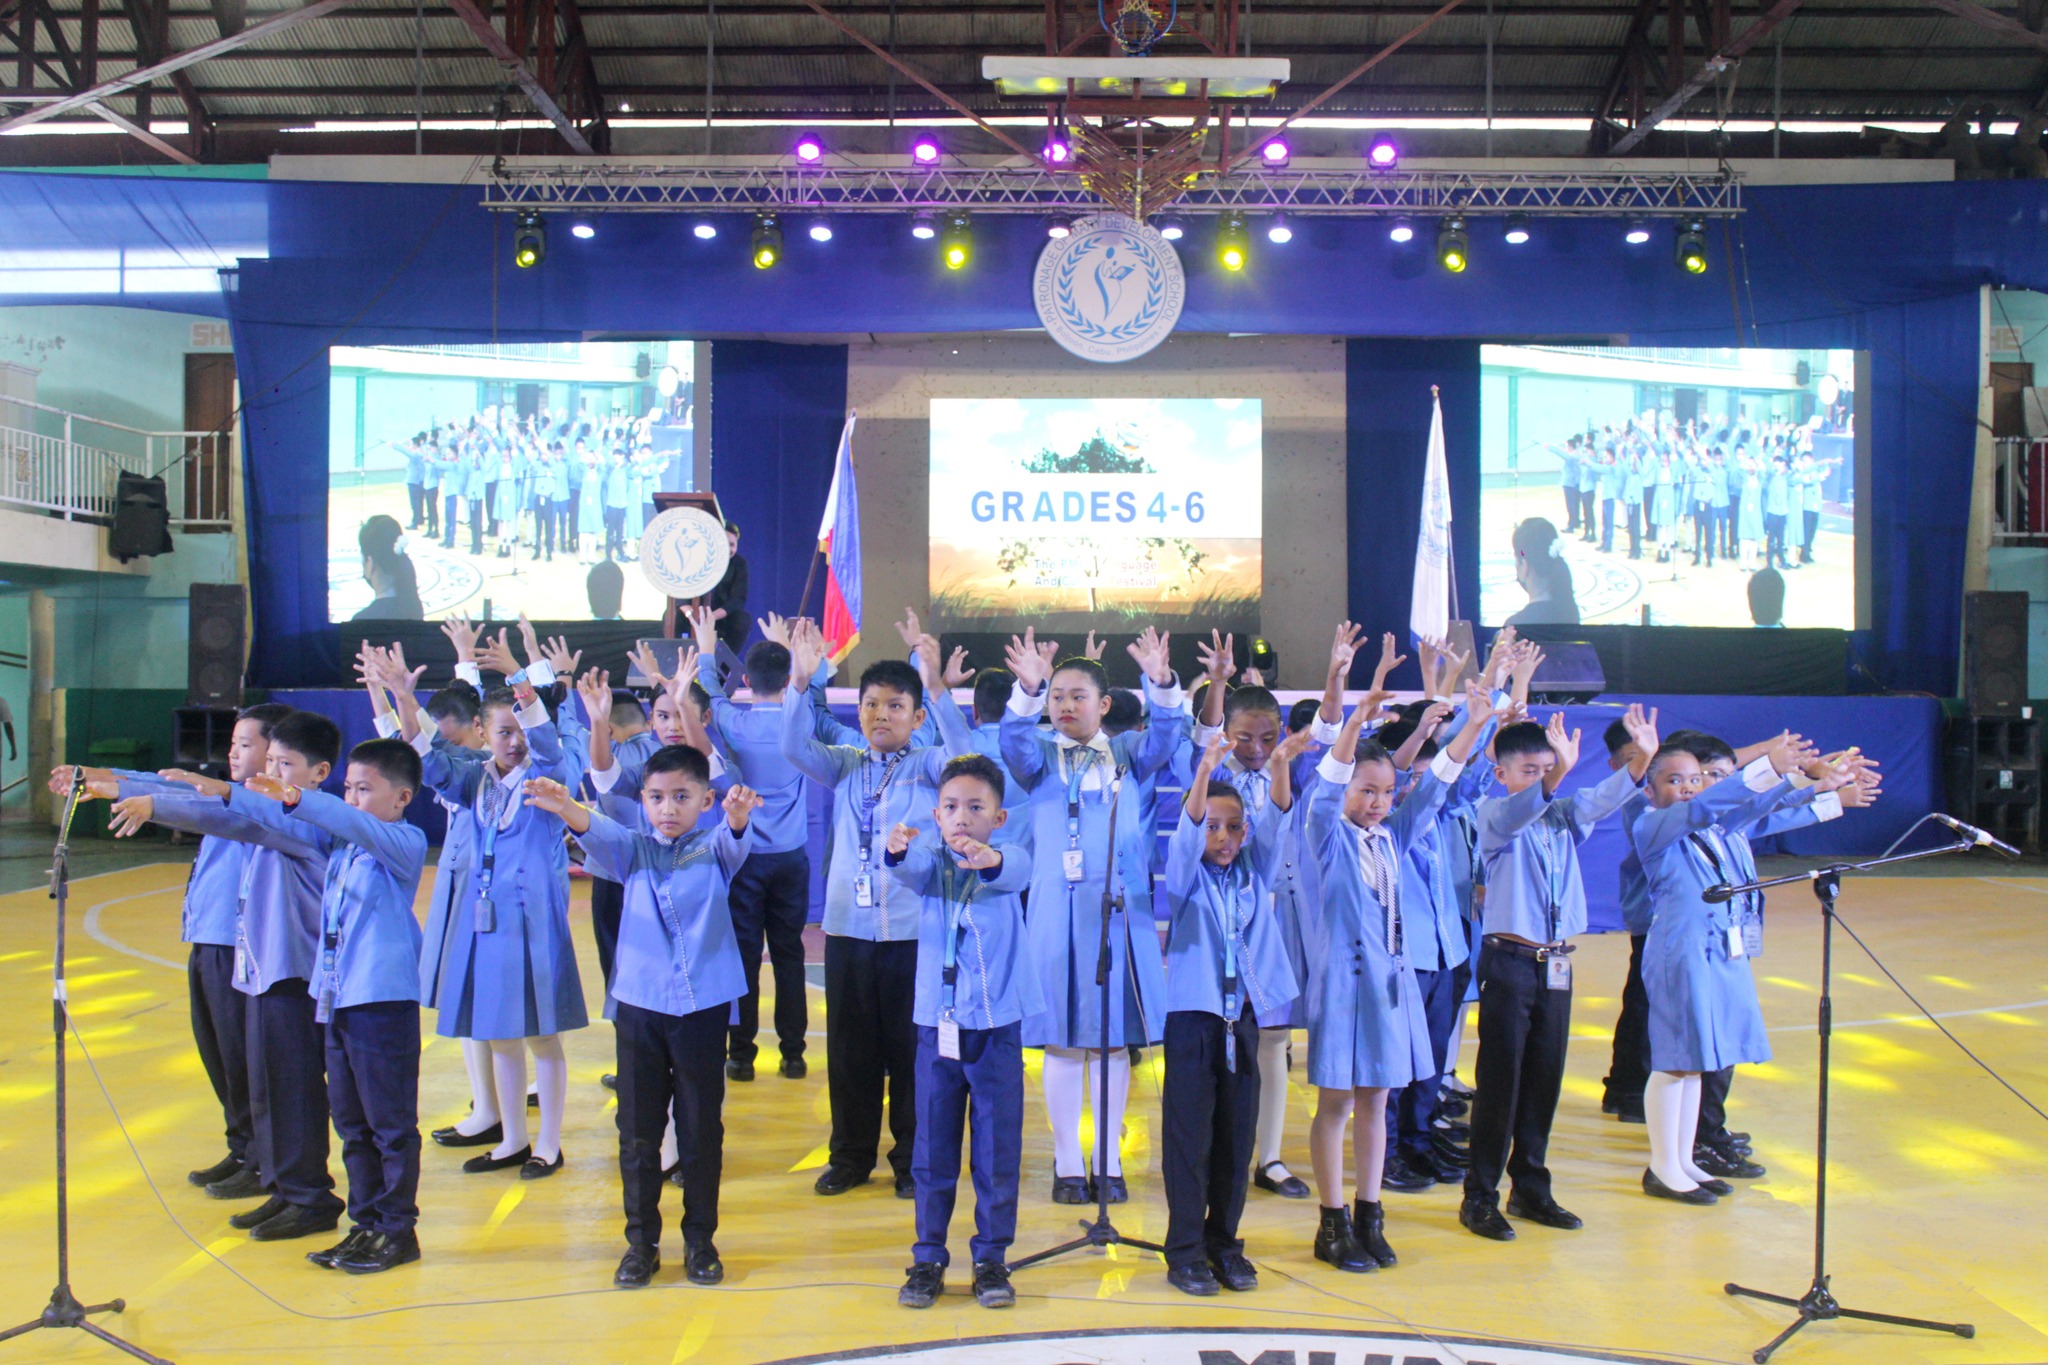 17. SPEECH CHOIR COMPETITION AS PART OF THE LANGUAGE AND CULTURE FESTIVAL (DECEMBER 10, 2022)